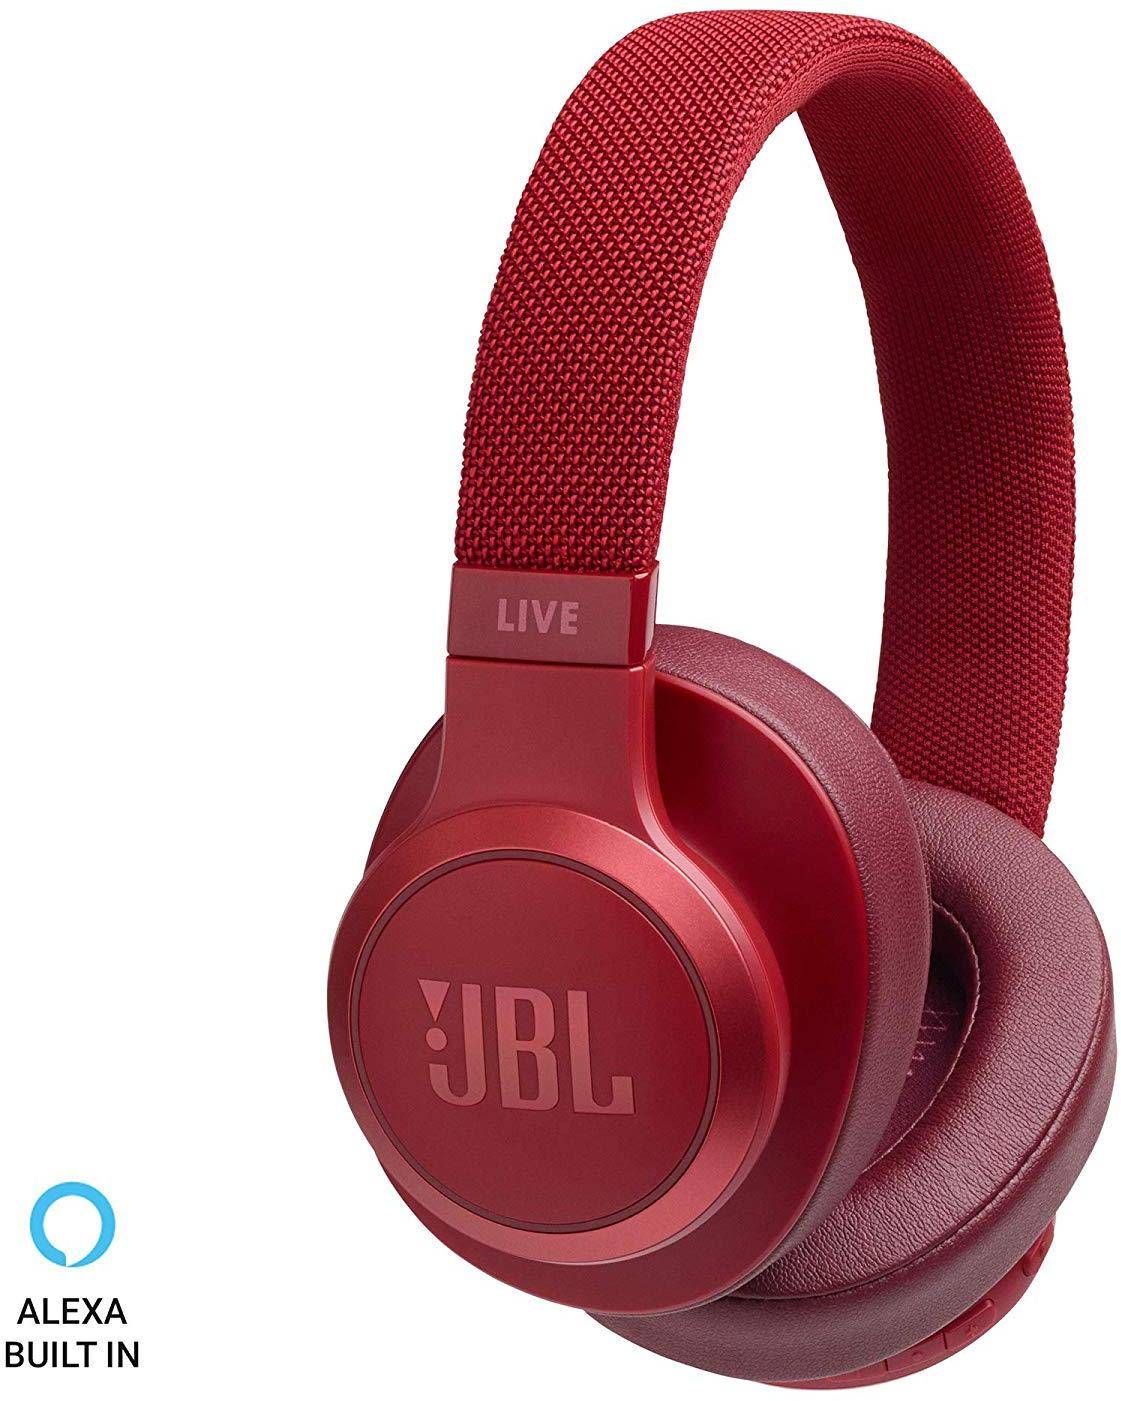 JBL Live 500BT Wireless Bluetooth Over-Ear Voice Enabled Headphones  zoom image